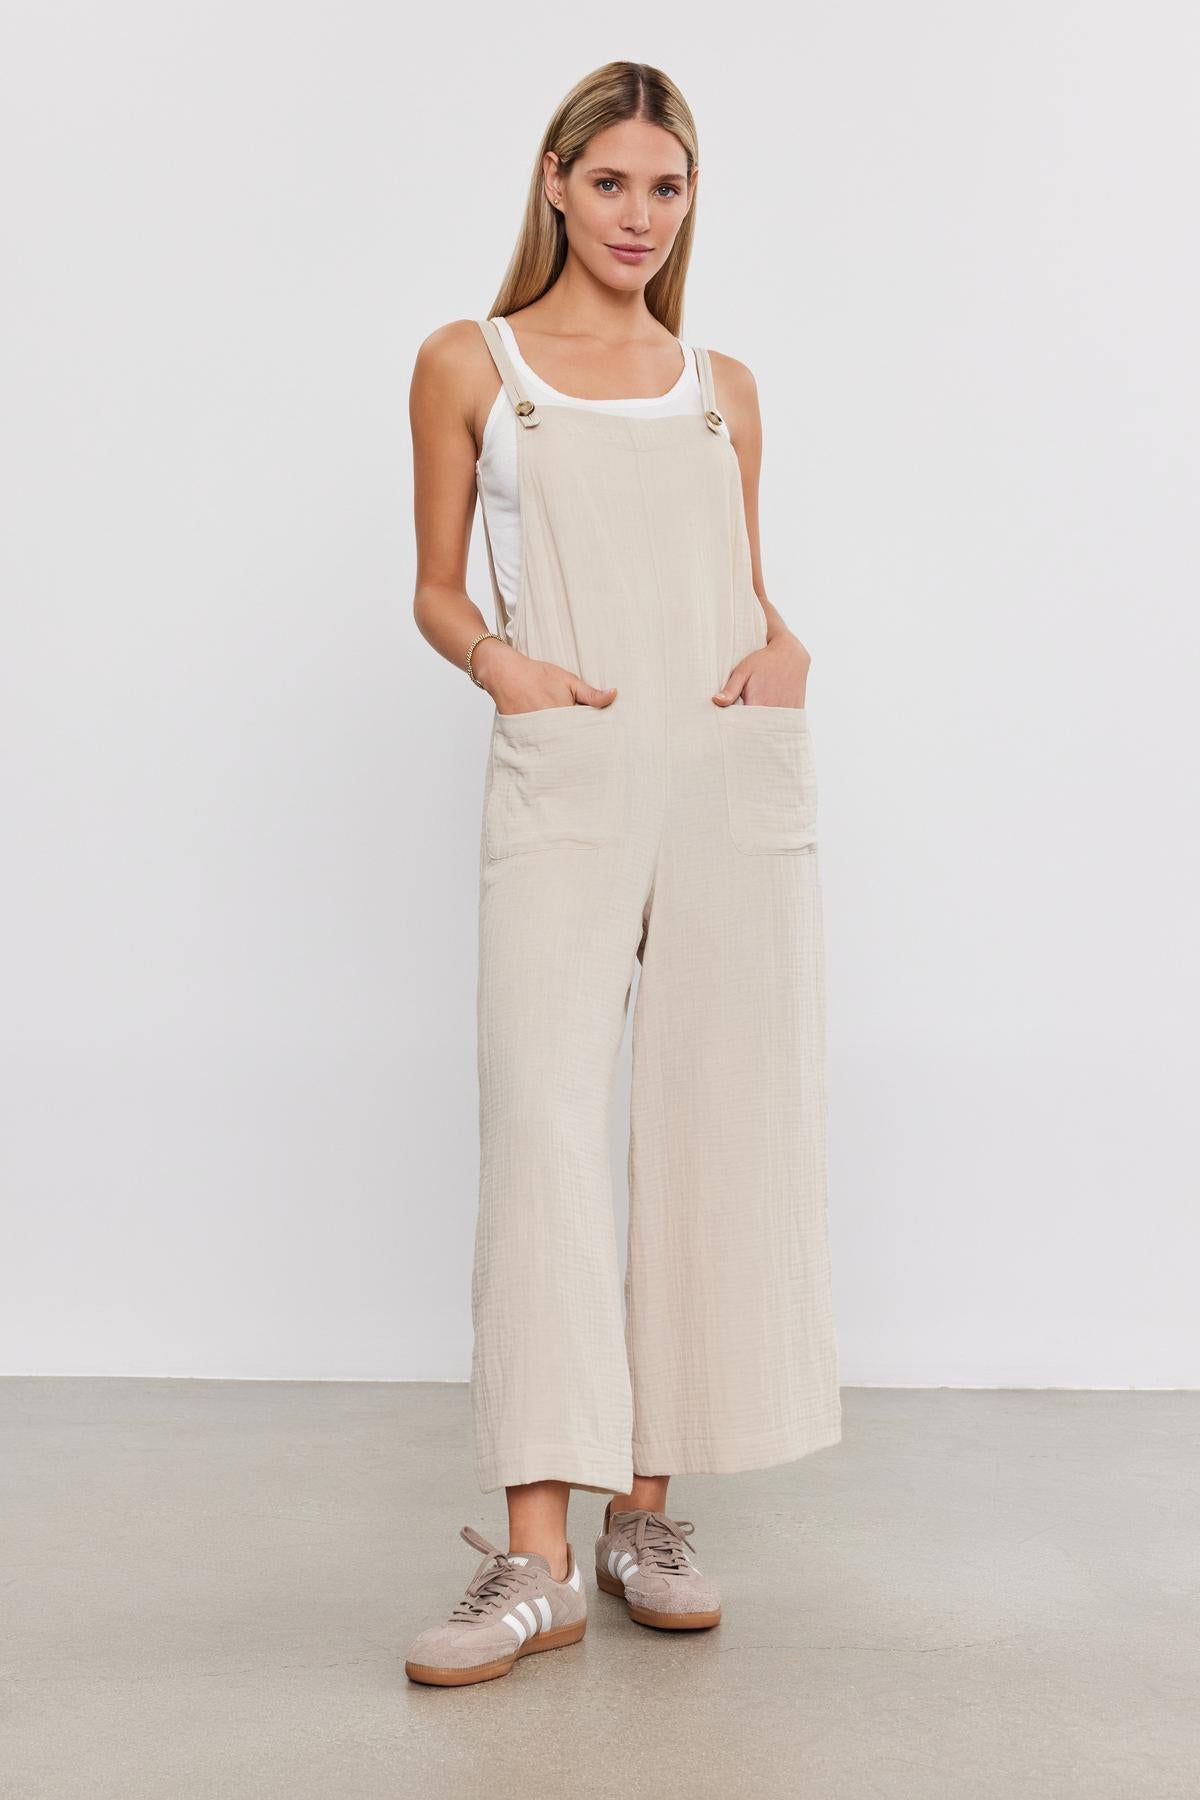 A woman stands in a studio, wearing a white tank top and Velvet by Graham & Spencer beige cotton gauze jumpsuit with patch pockets, paired with brown sneakers, looking directly at the camera.-36910029078721